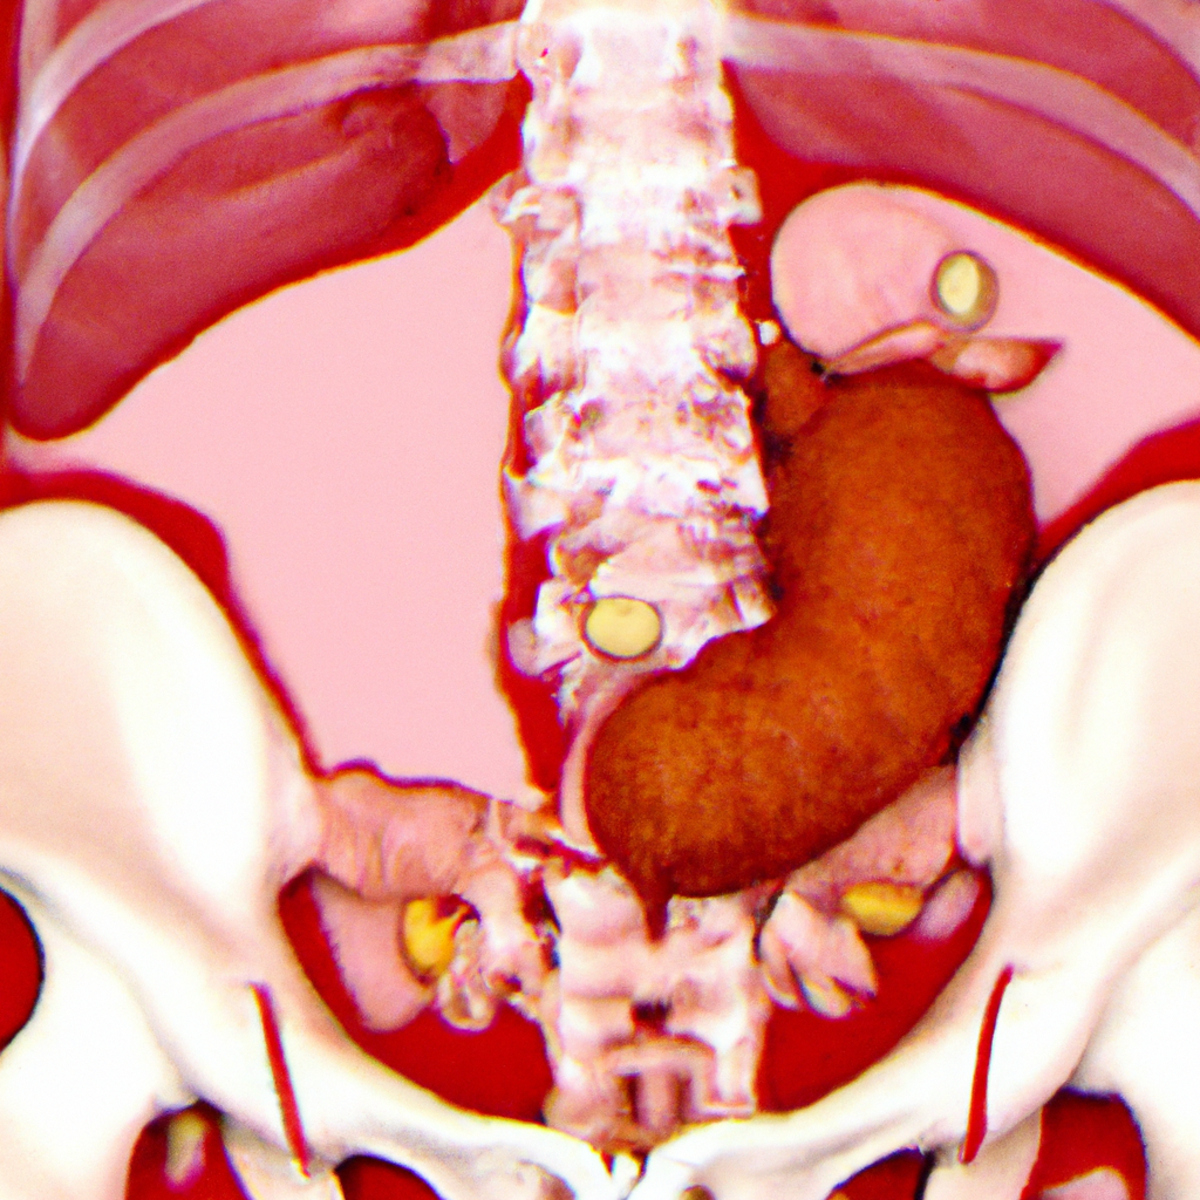 Close-up image of medical model showcasing human abdomen with absent gallbladder, highlighting surrounding organs.